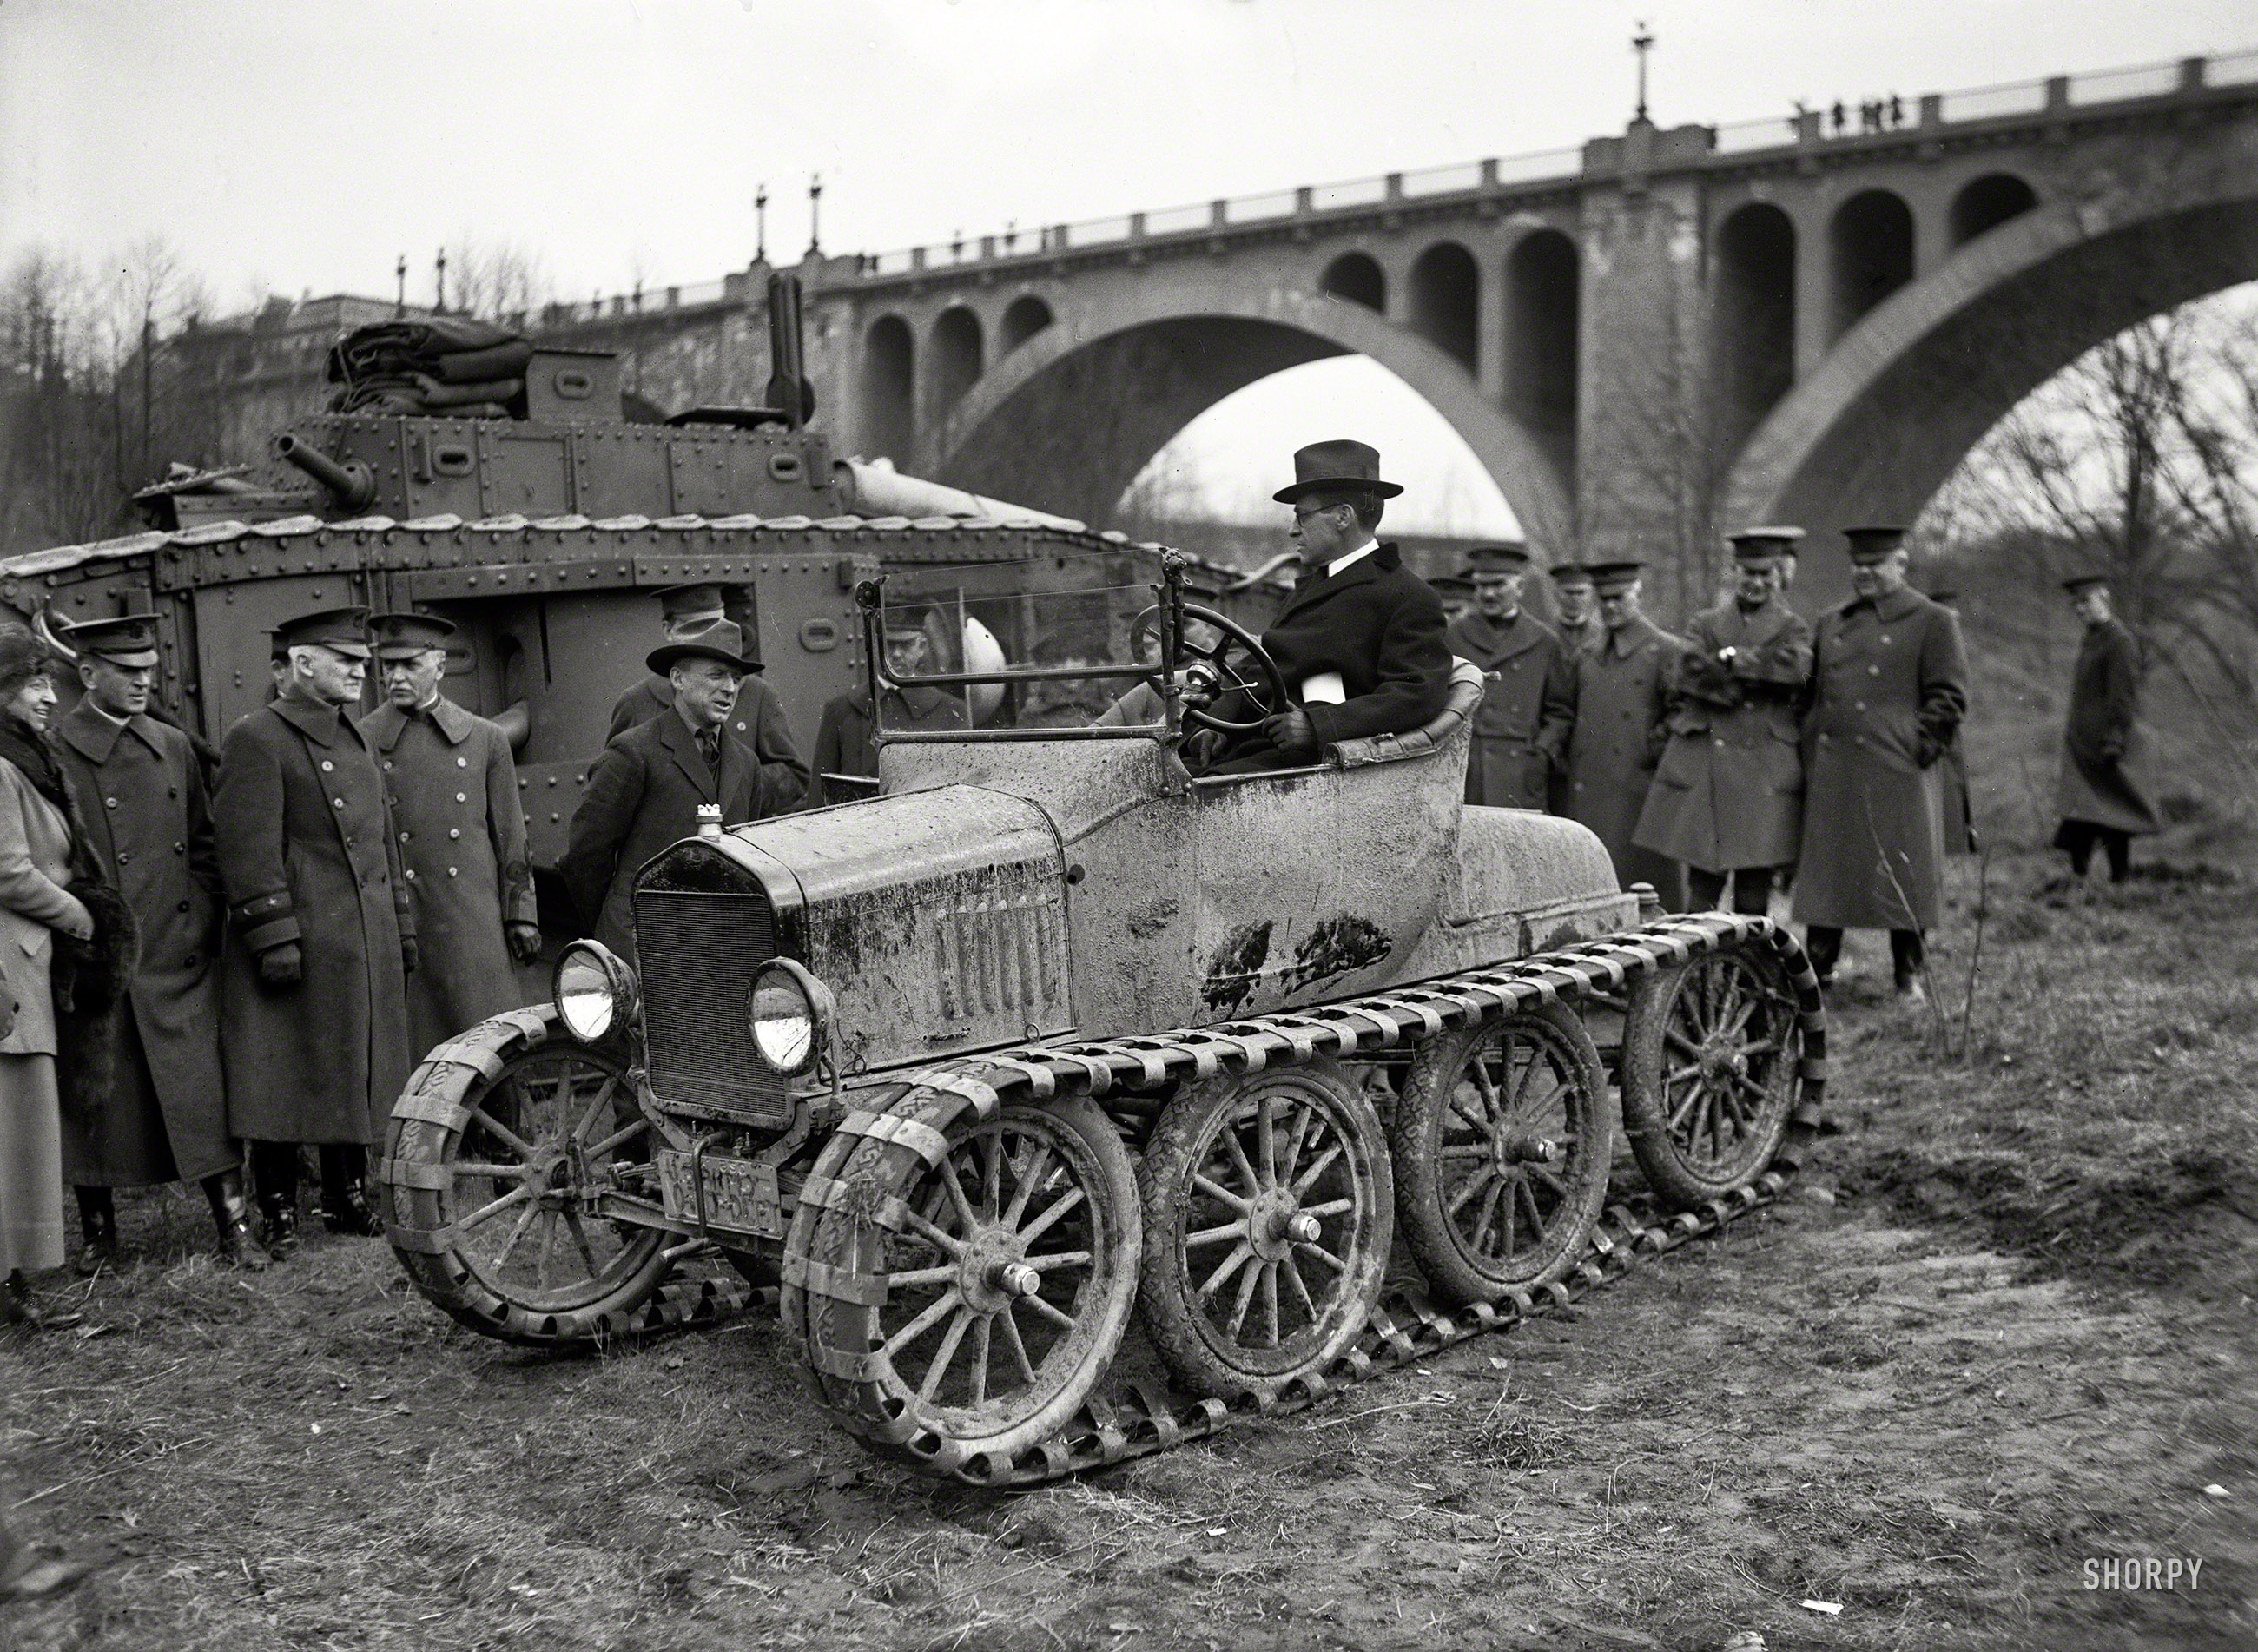 &nbsp; &nbsp; &nbsp; &nbsp; "Secretary of War Newton D. Baker trying out a new eight-wheel Ford tractor, which has the reputation of being able to get over almost any road. Among the dignitaries in the background is Maj. Gen. Peyton C. March." Click here for another view.
February 1921. Washington, D.C. "Army car at Connecticut Avenue Bridge." A sort of Model T on steroids. Harris & Ewing Collection glass negative. View full size.